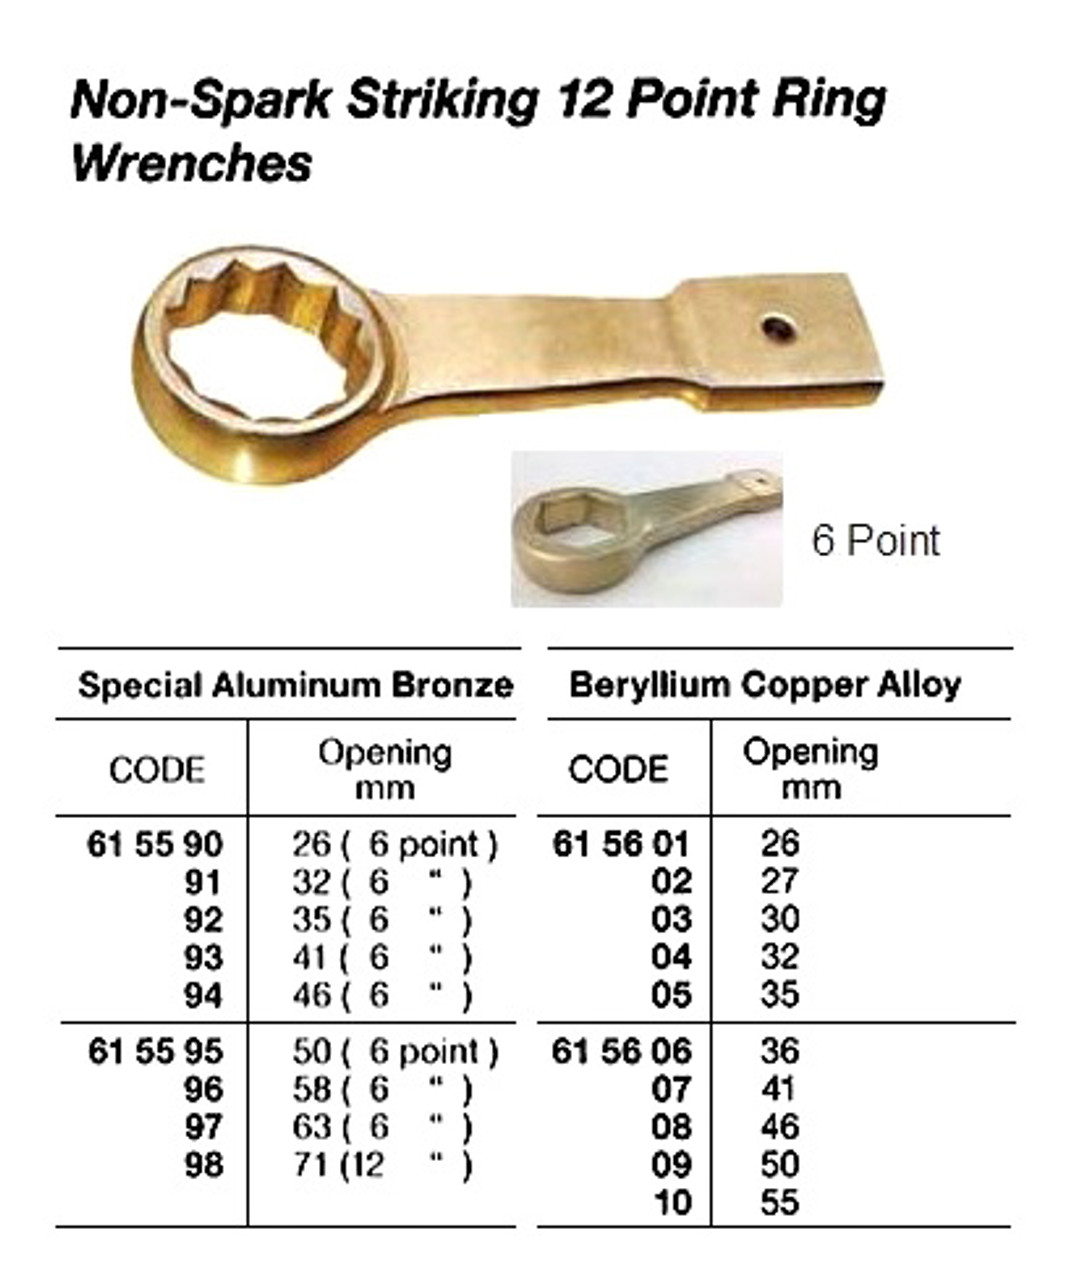 IMPA 615597 WRENCH STRIKING RING 12-POINT NON-SPARK MBK 63MM